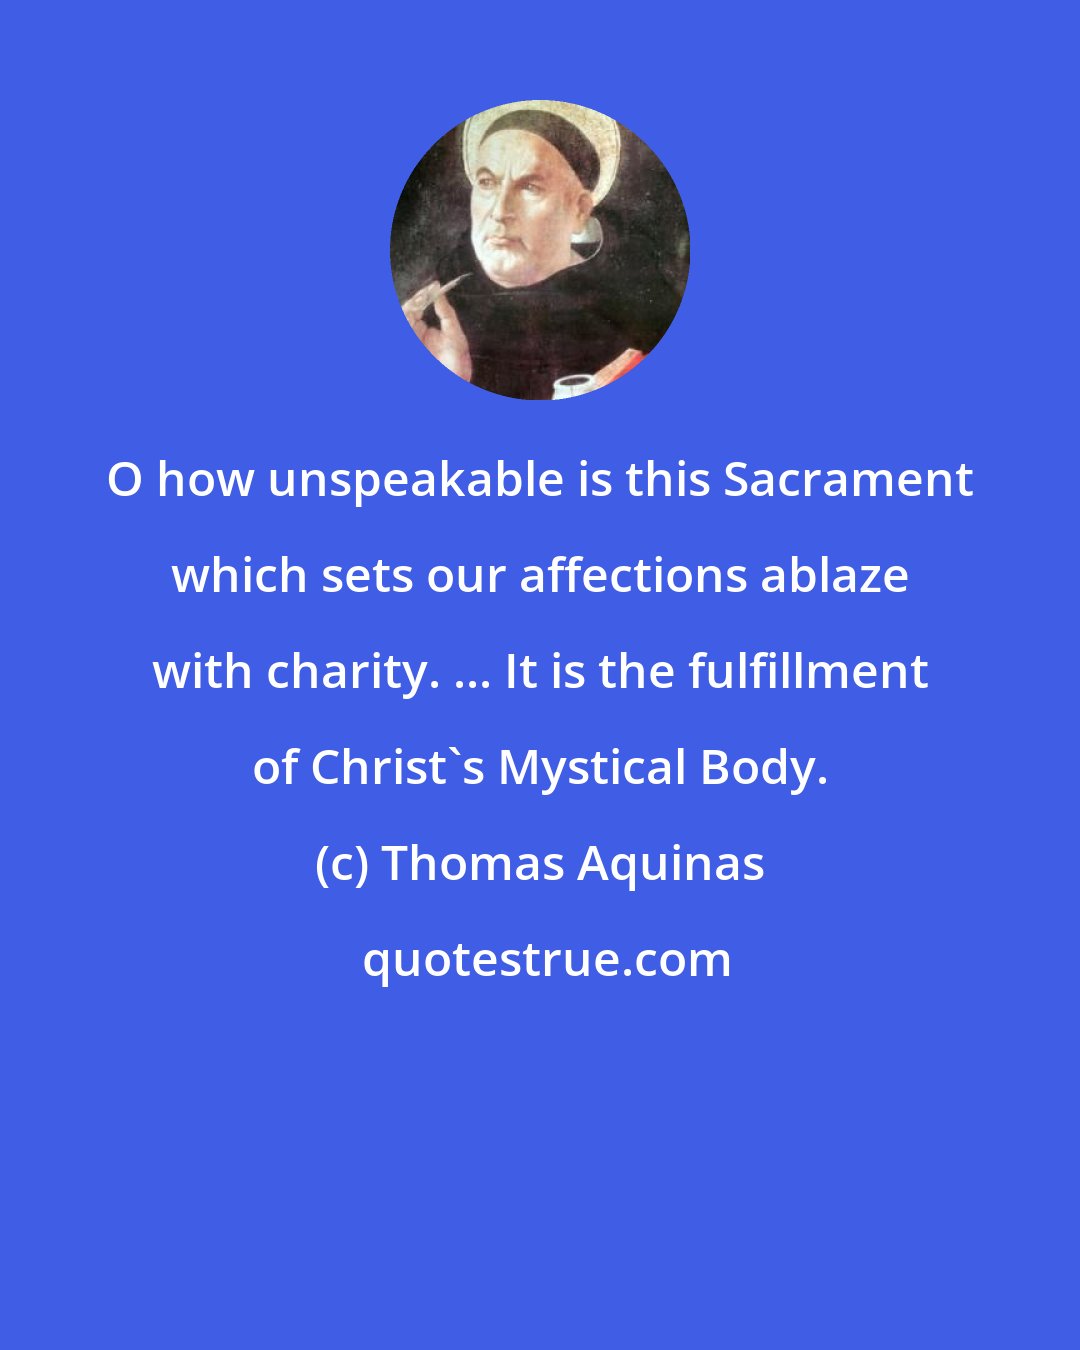 Thomas Aquinas: O how unspeakable is this Sacrament which sets our affections ablaze with charity. ... It is the fulfillment of Christ's Mystical Body.